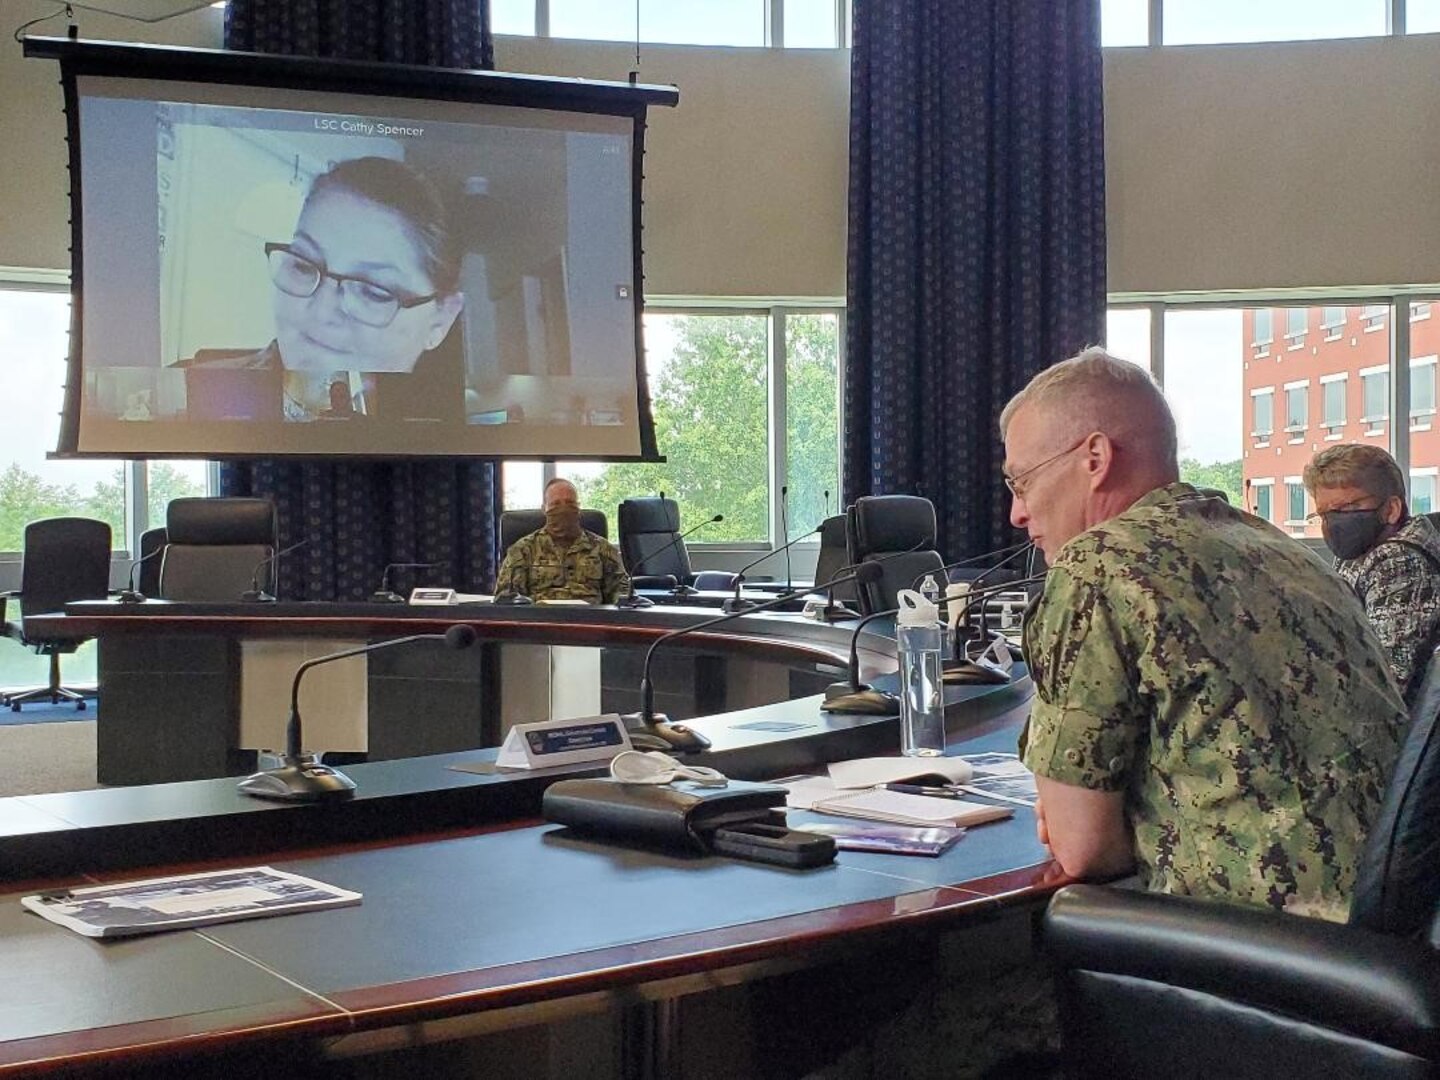 Rear Adm. Grafton Chase is seated at a conference table addressing a virtual participant projected onto a screen